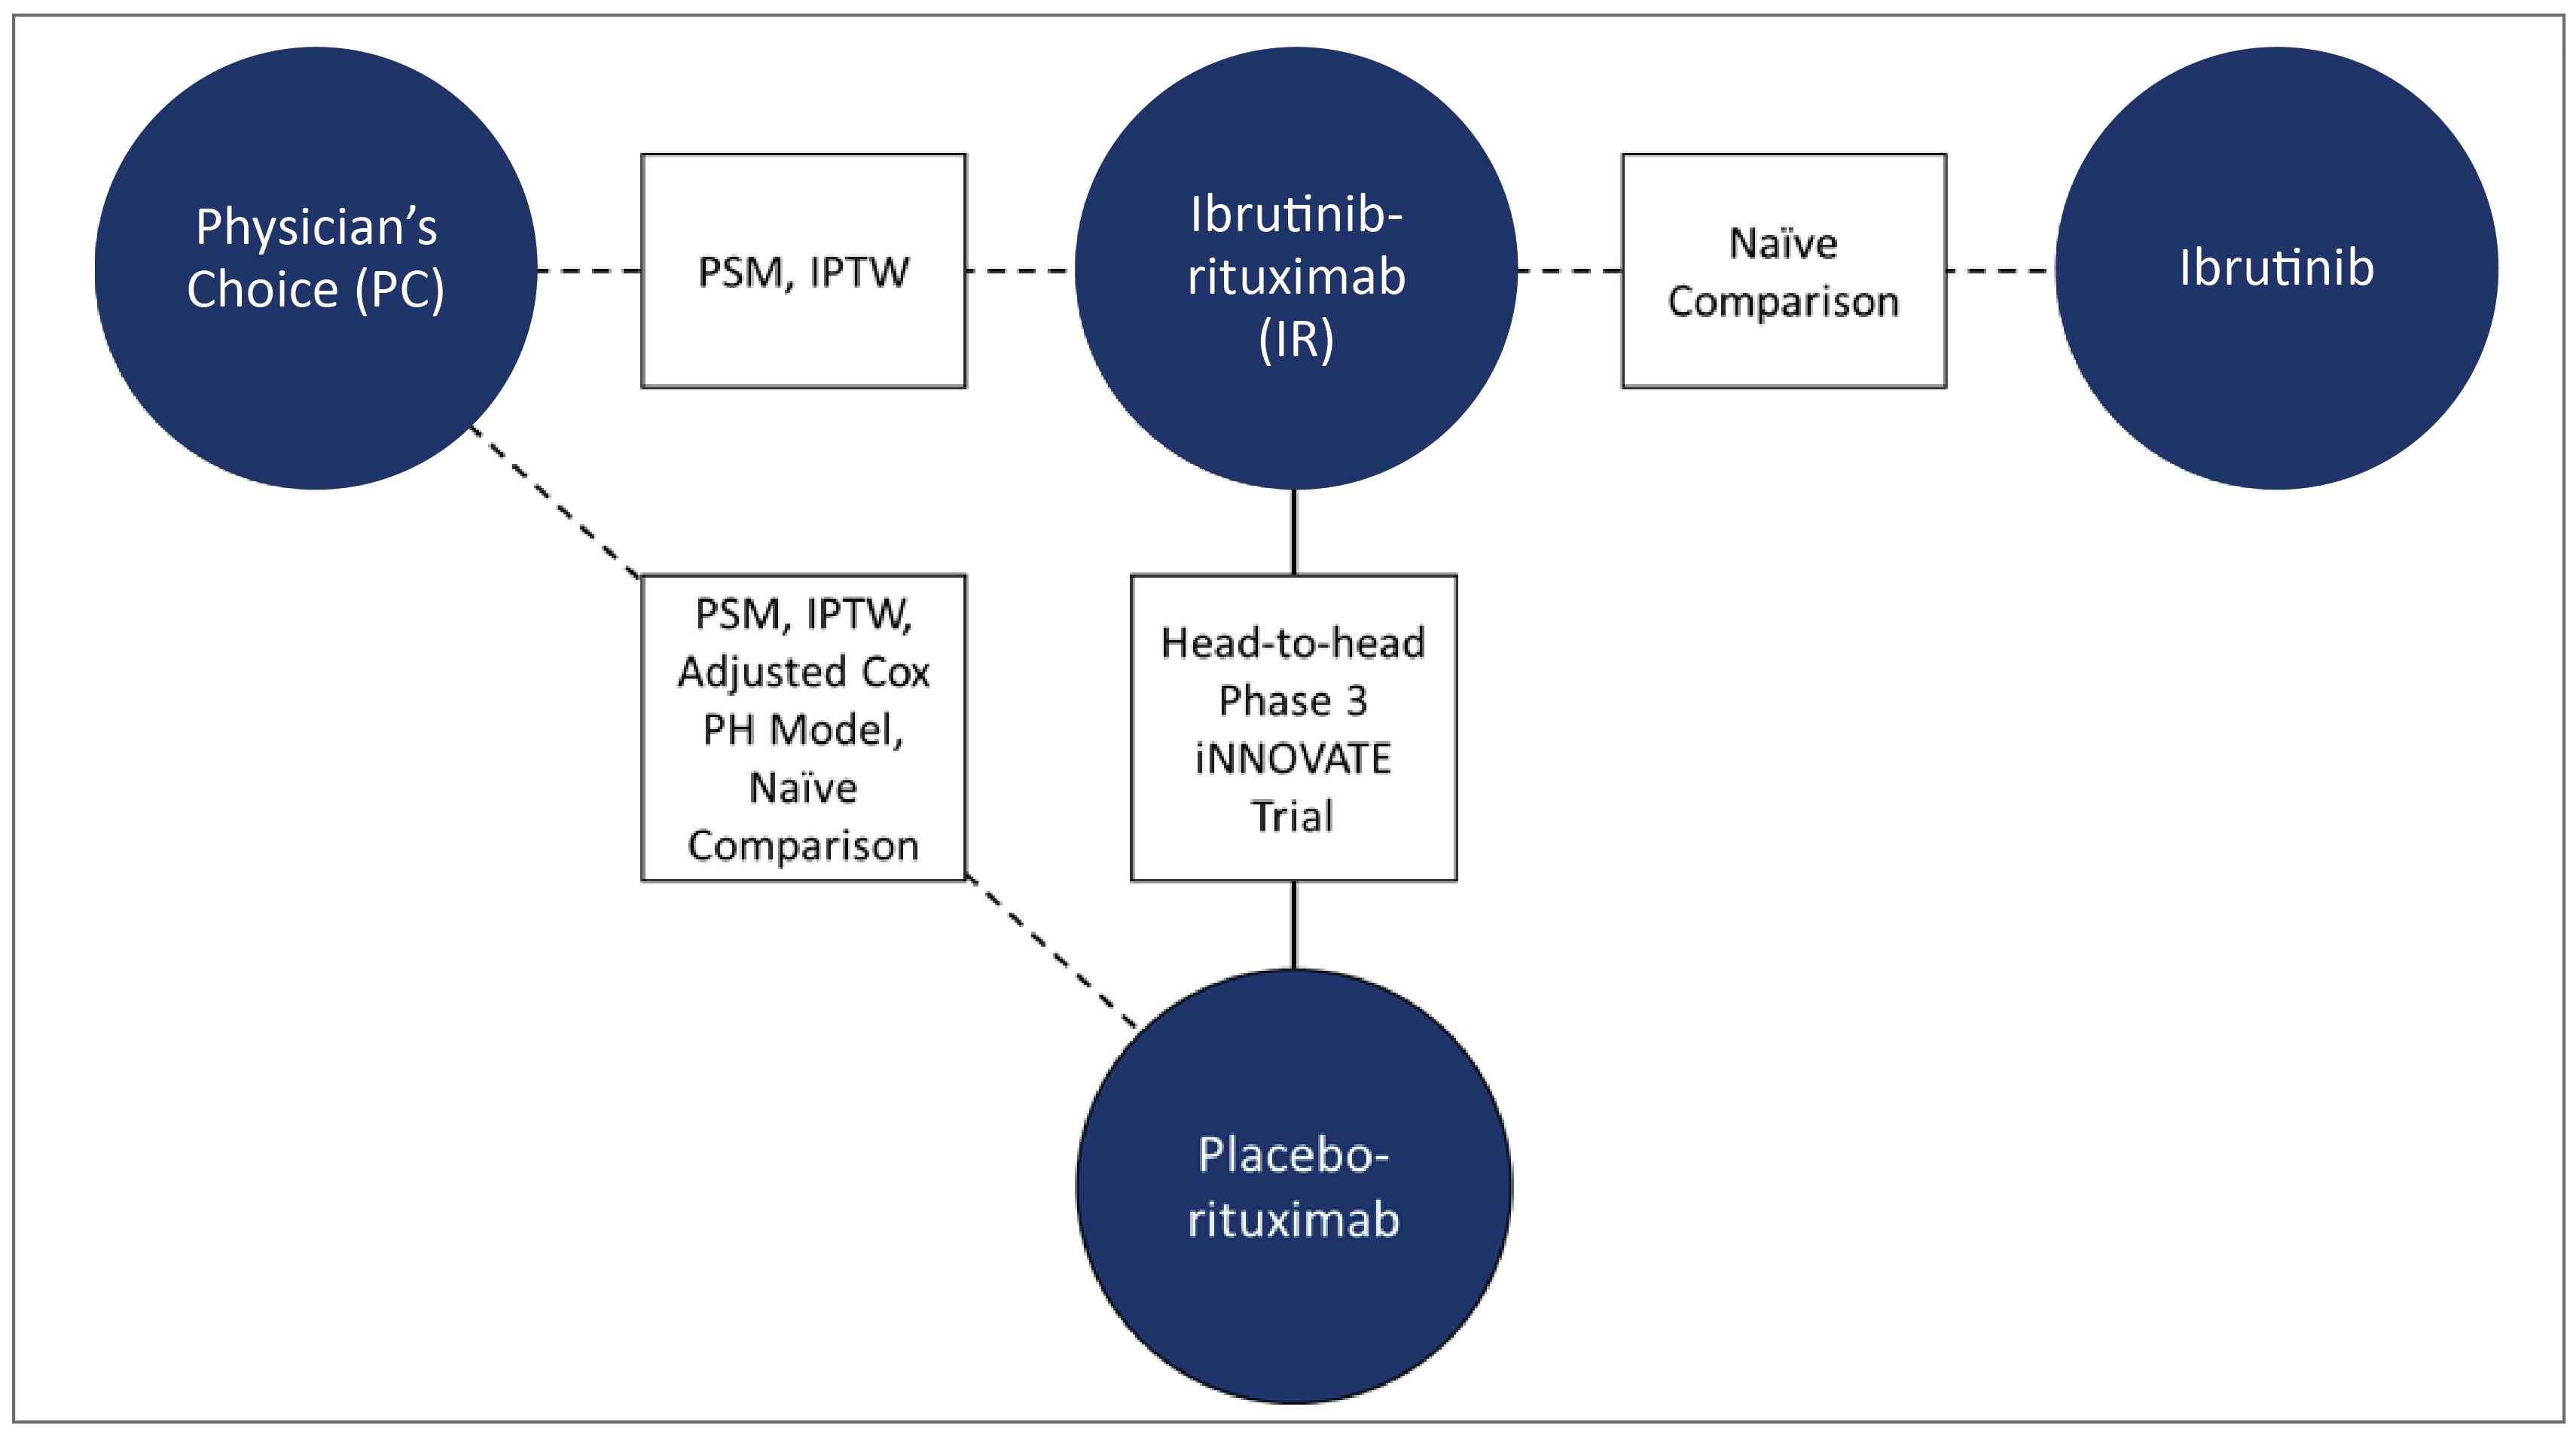 The figure depicts the network of the body of evidence with 4 blue circles, 1 for each treatment (PC, IR, ibrutinib, placebo and rituximab) and in between the methods for comparing them.